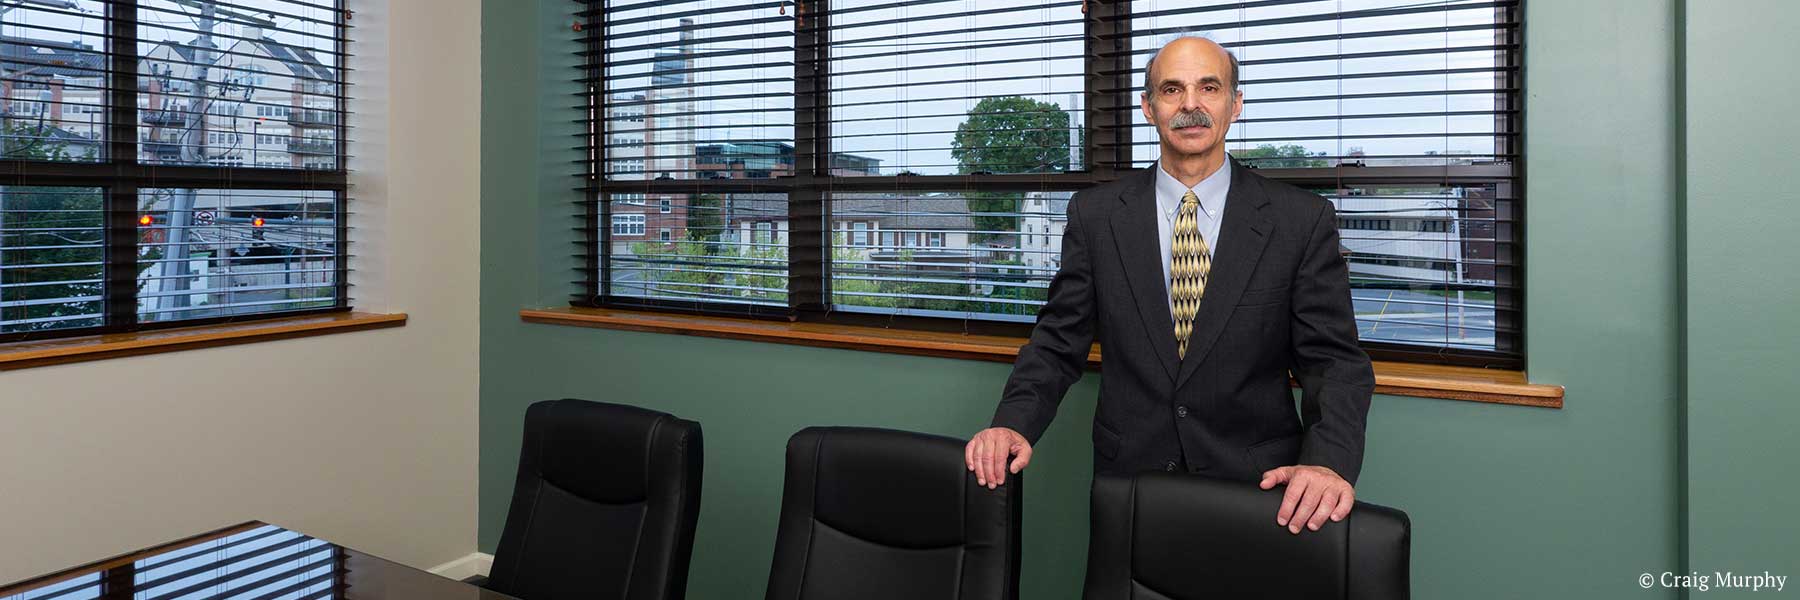 New York State lawyer Neil H. Lebowitz posing in conference room with Glens Falls, New York cityscape view in background. Photographer: Craig Murphy. Copyright owner-licensor: Craig Murphy. Copyright licensee: Neil H. Lebowitz.